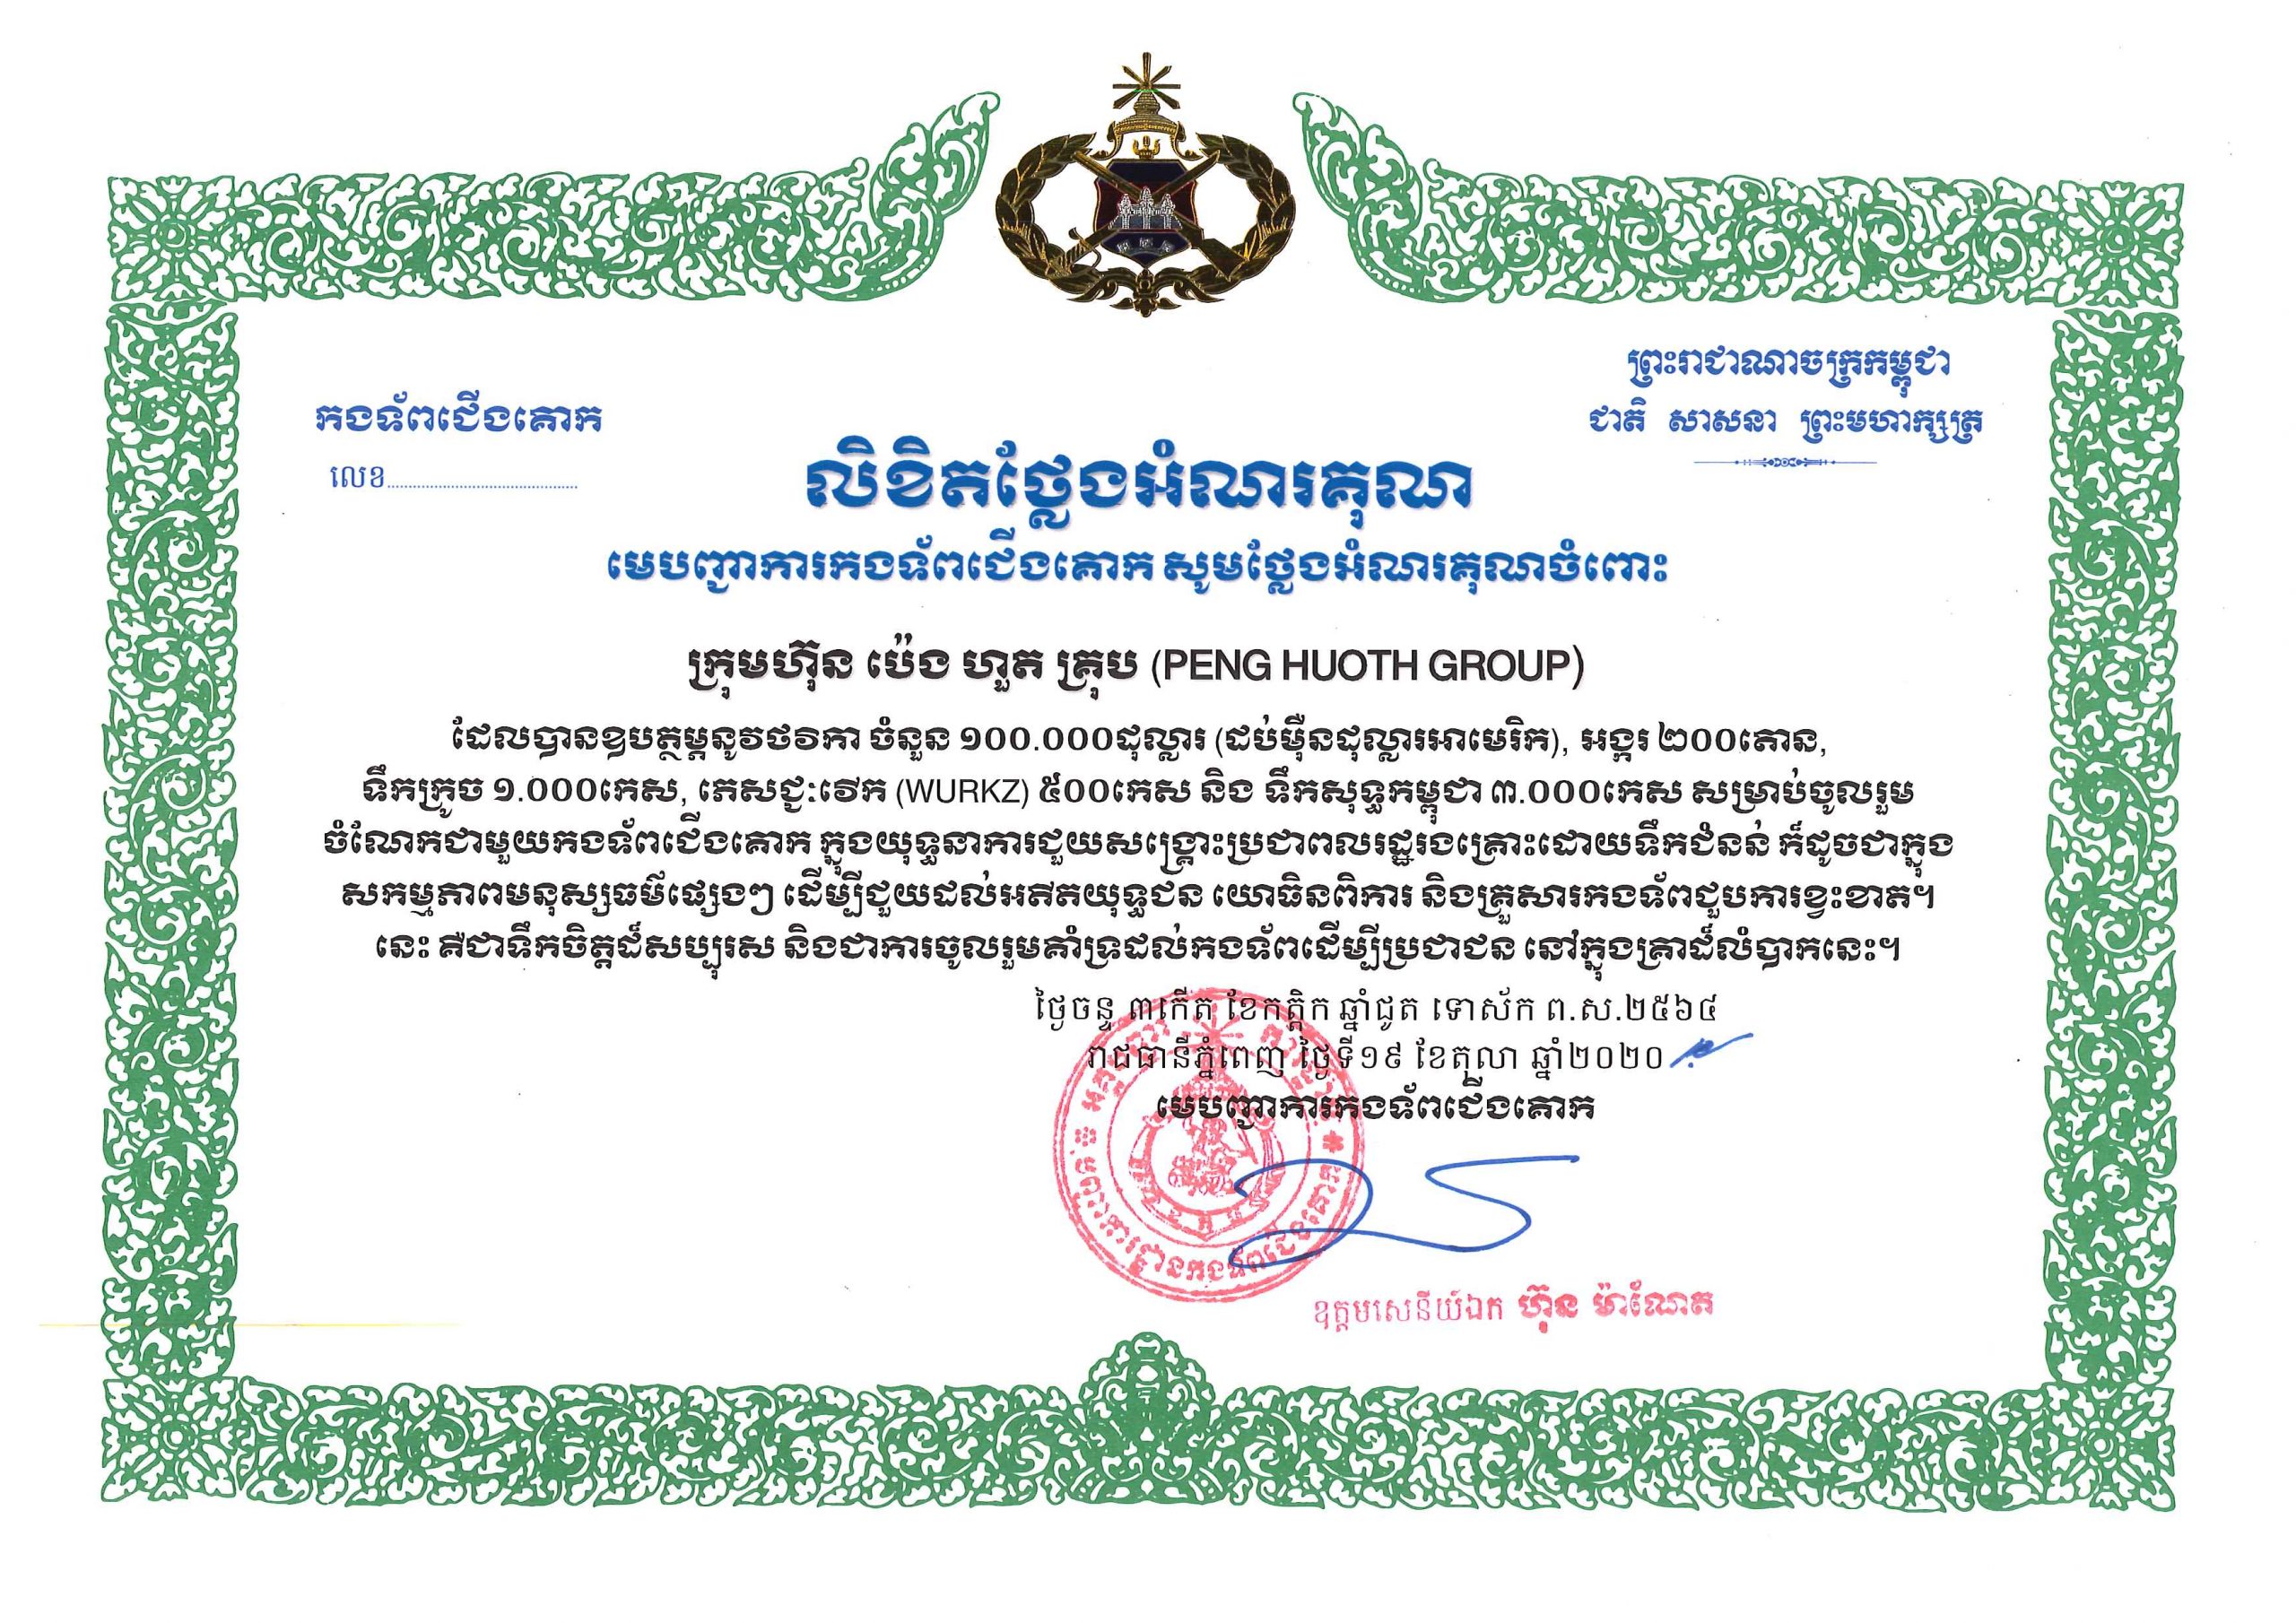 Certificate of Appreciation from commander of Royal Cambodian Army for USD 100,000 and other food and necesities donation to army in flood rescue mission